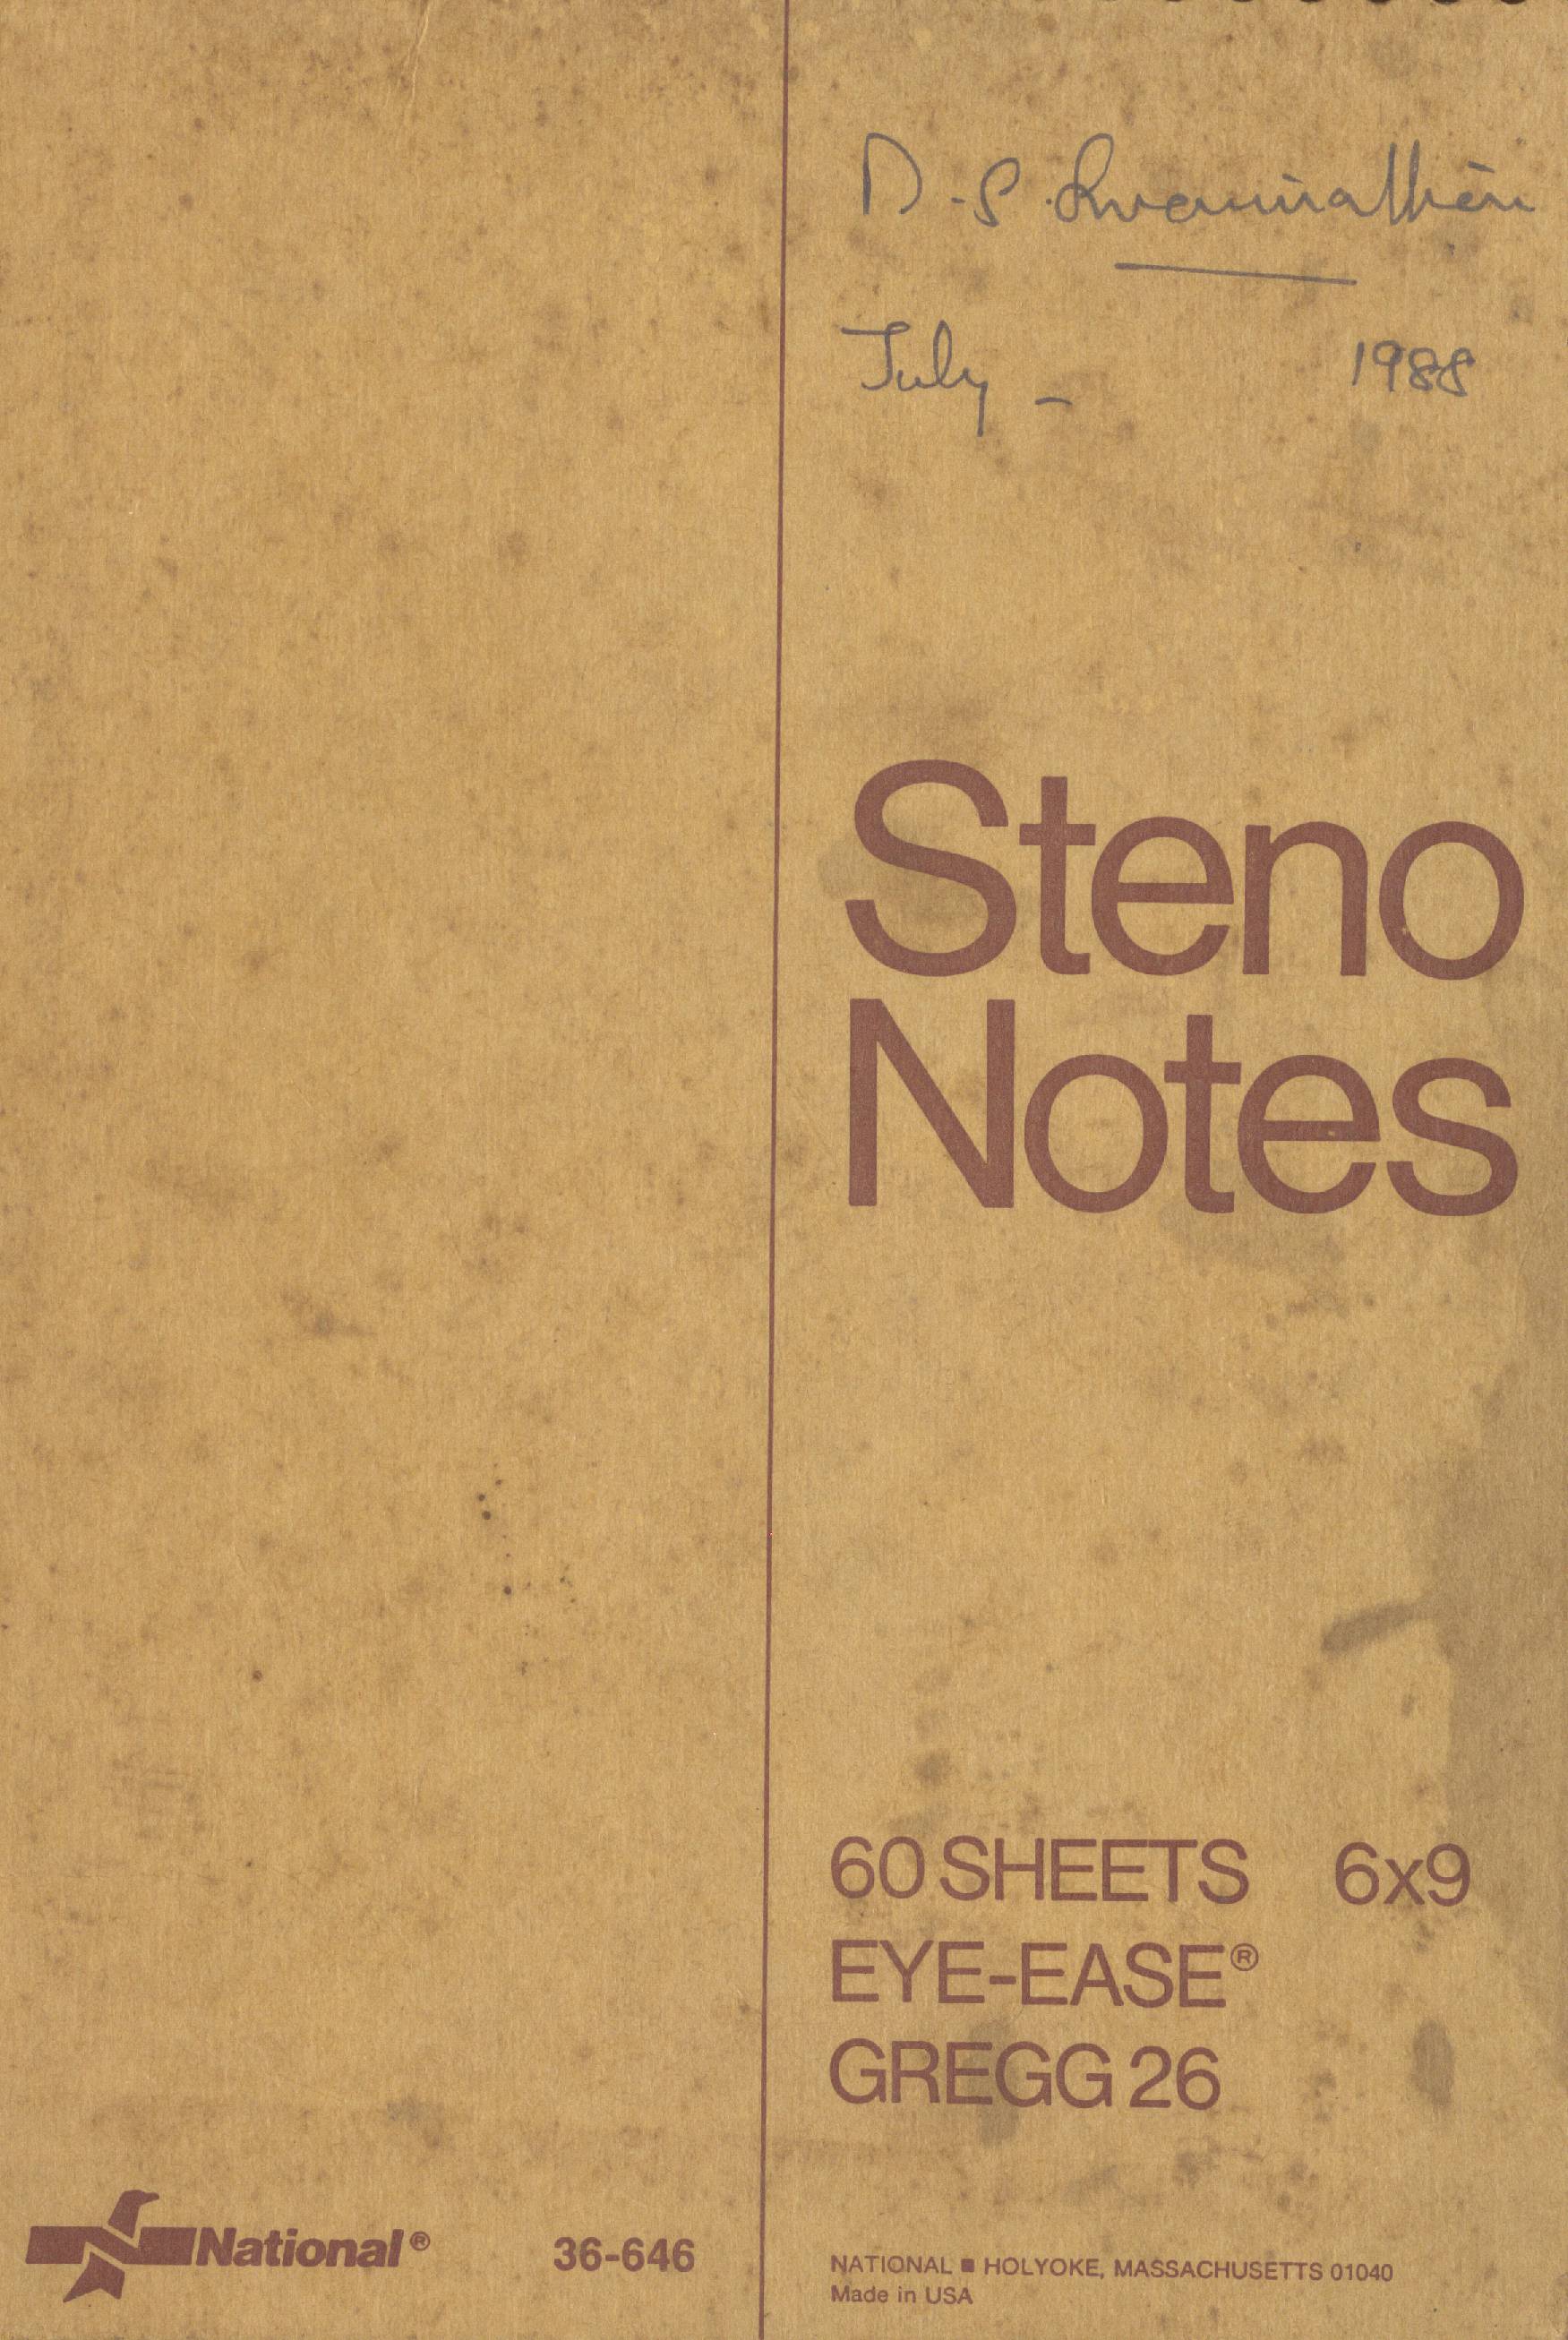 Notes, Conferences and Workshops -- 1988